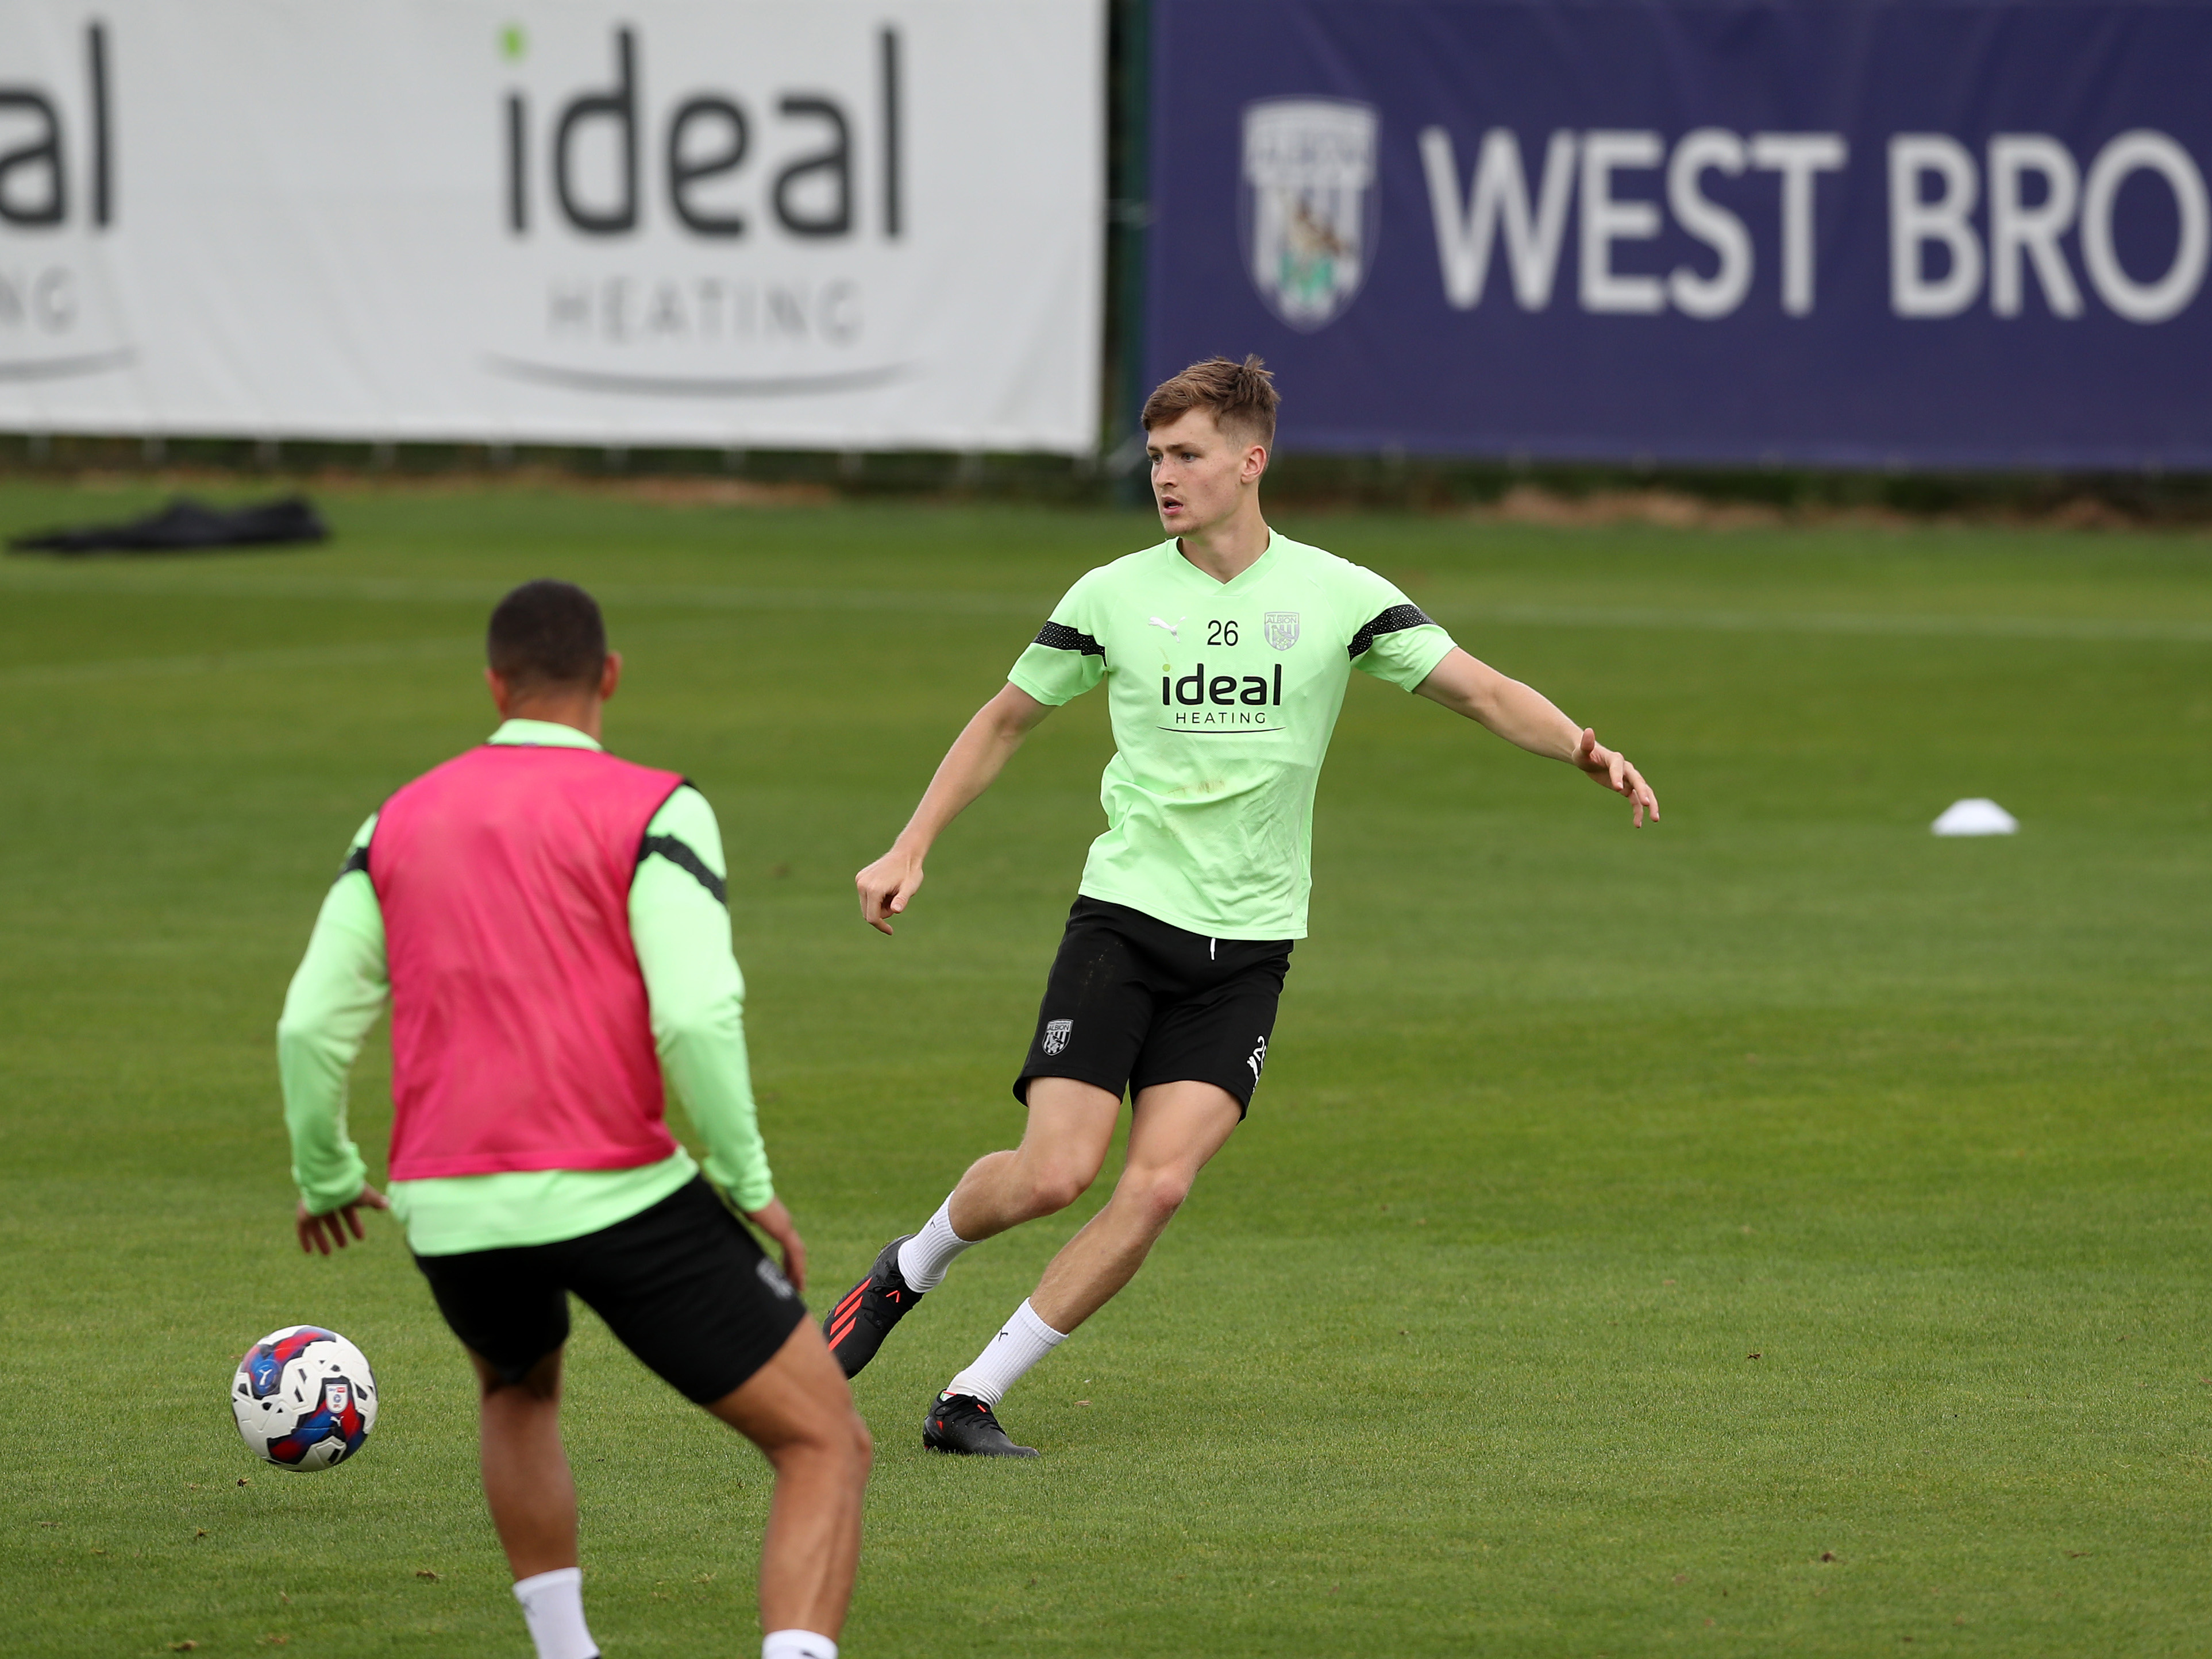 Zac Ashworth passing the ball during first team training